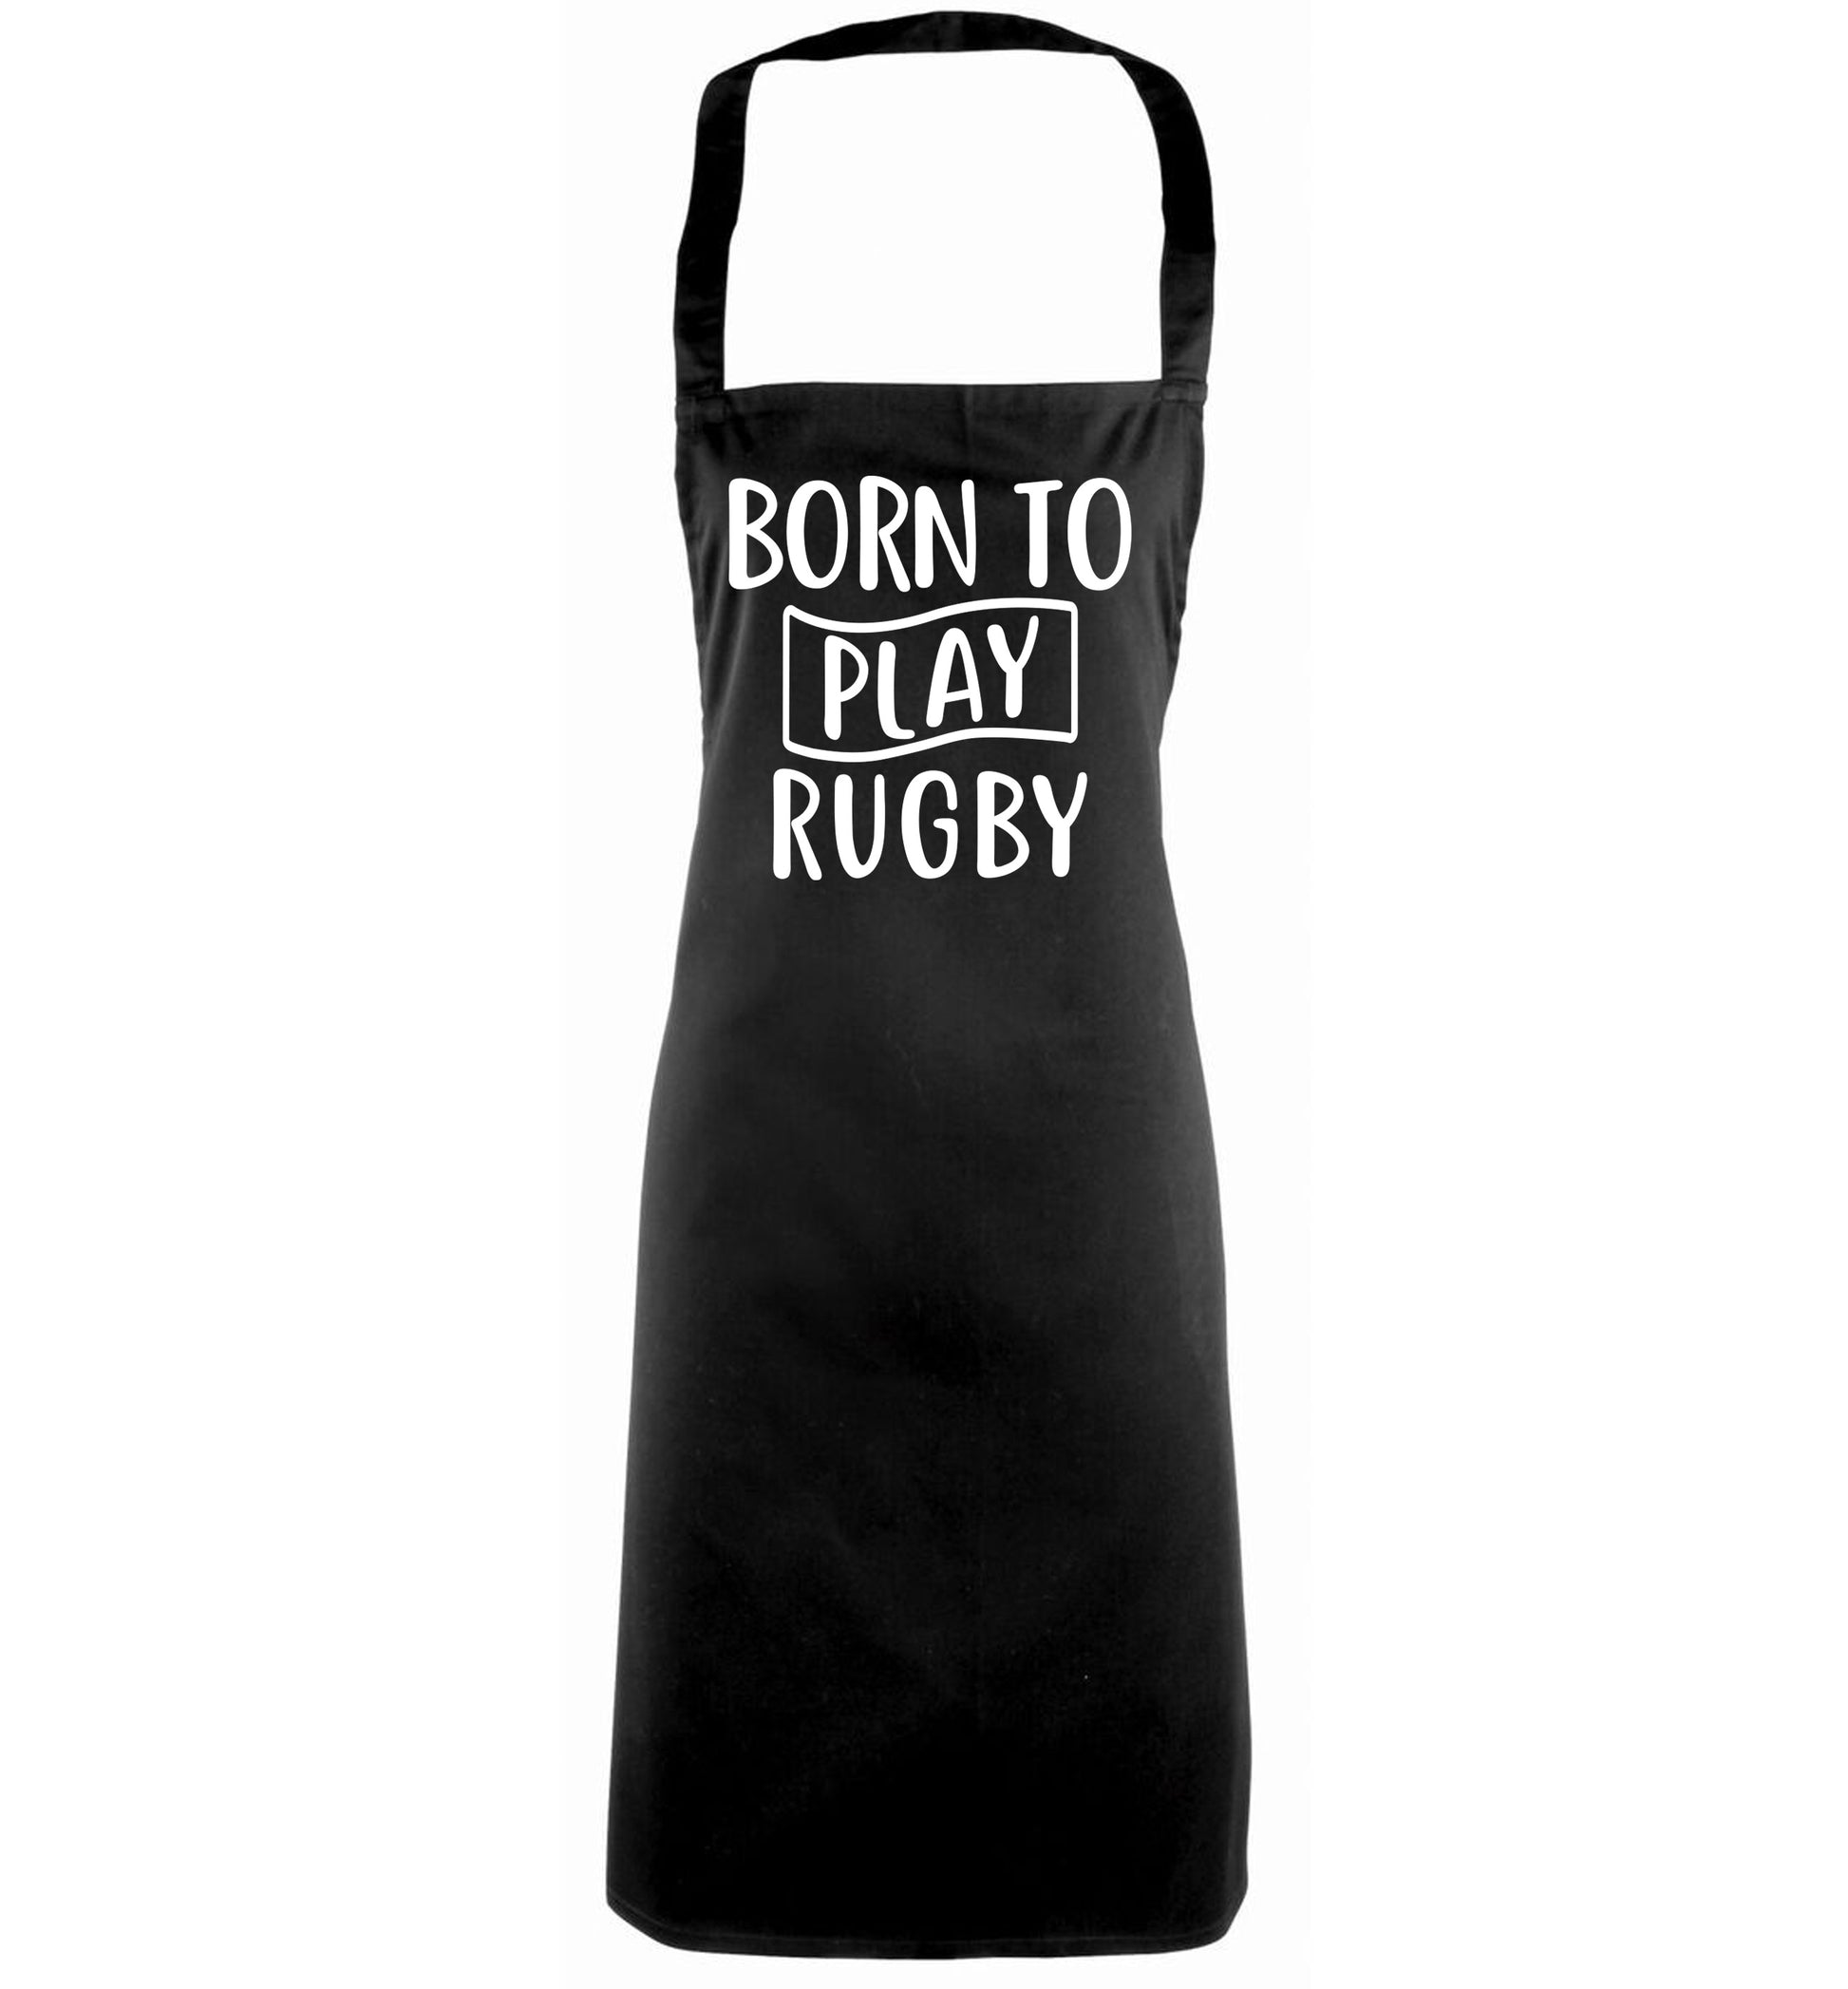 Born to play rugby black apron